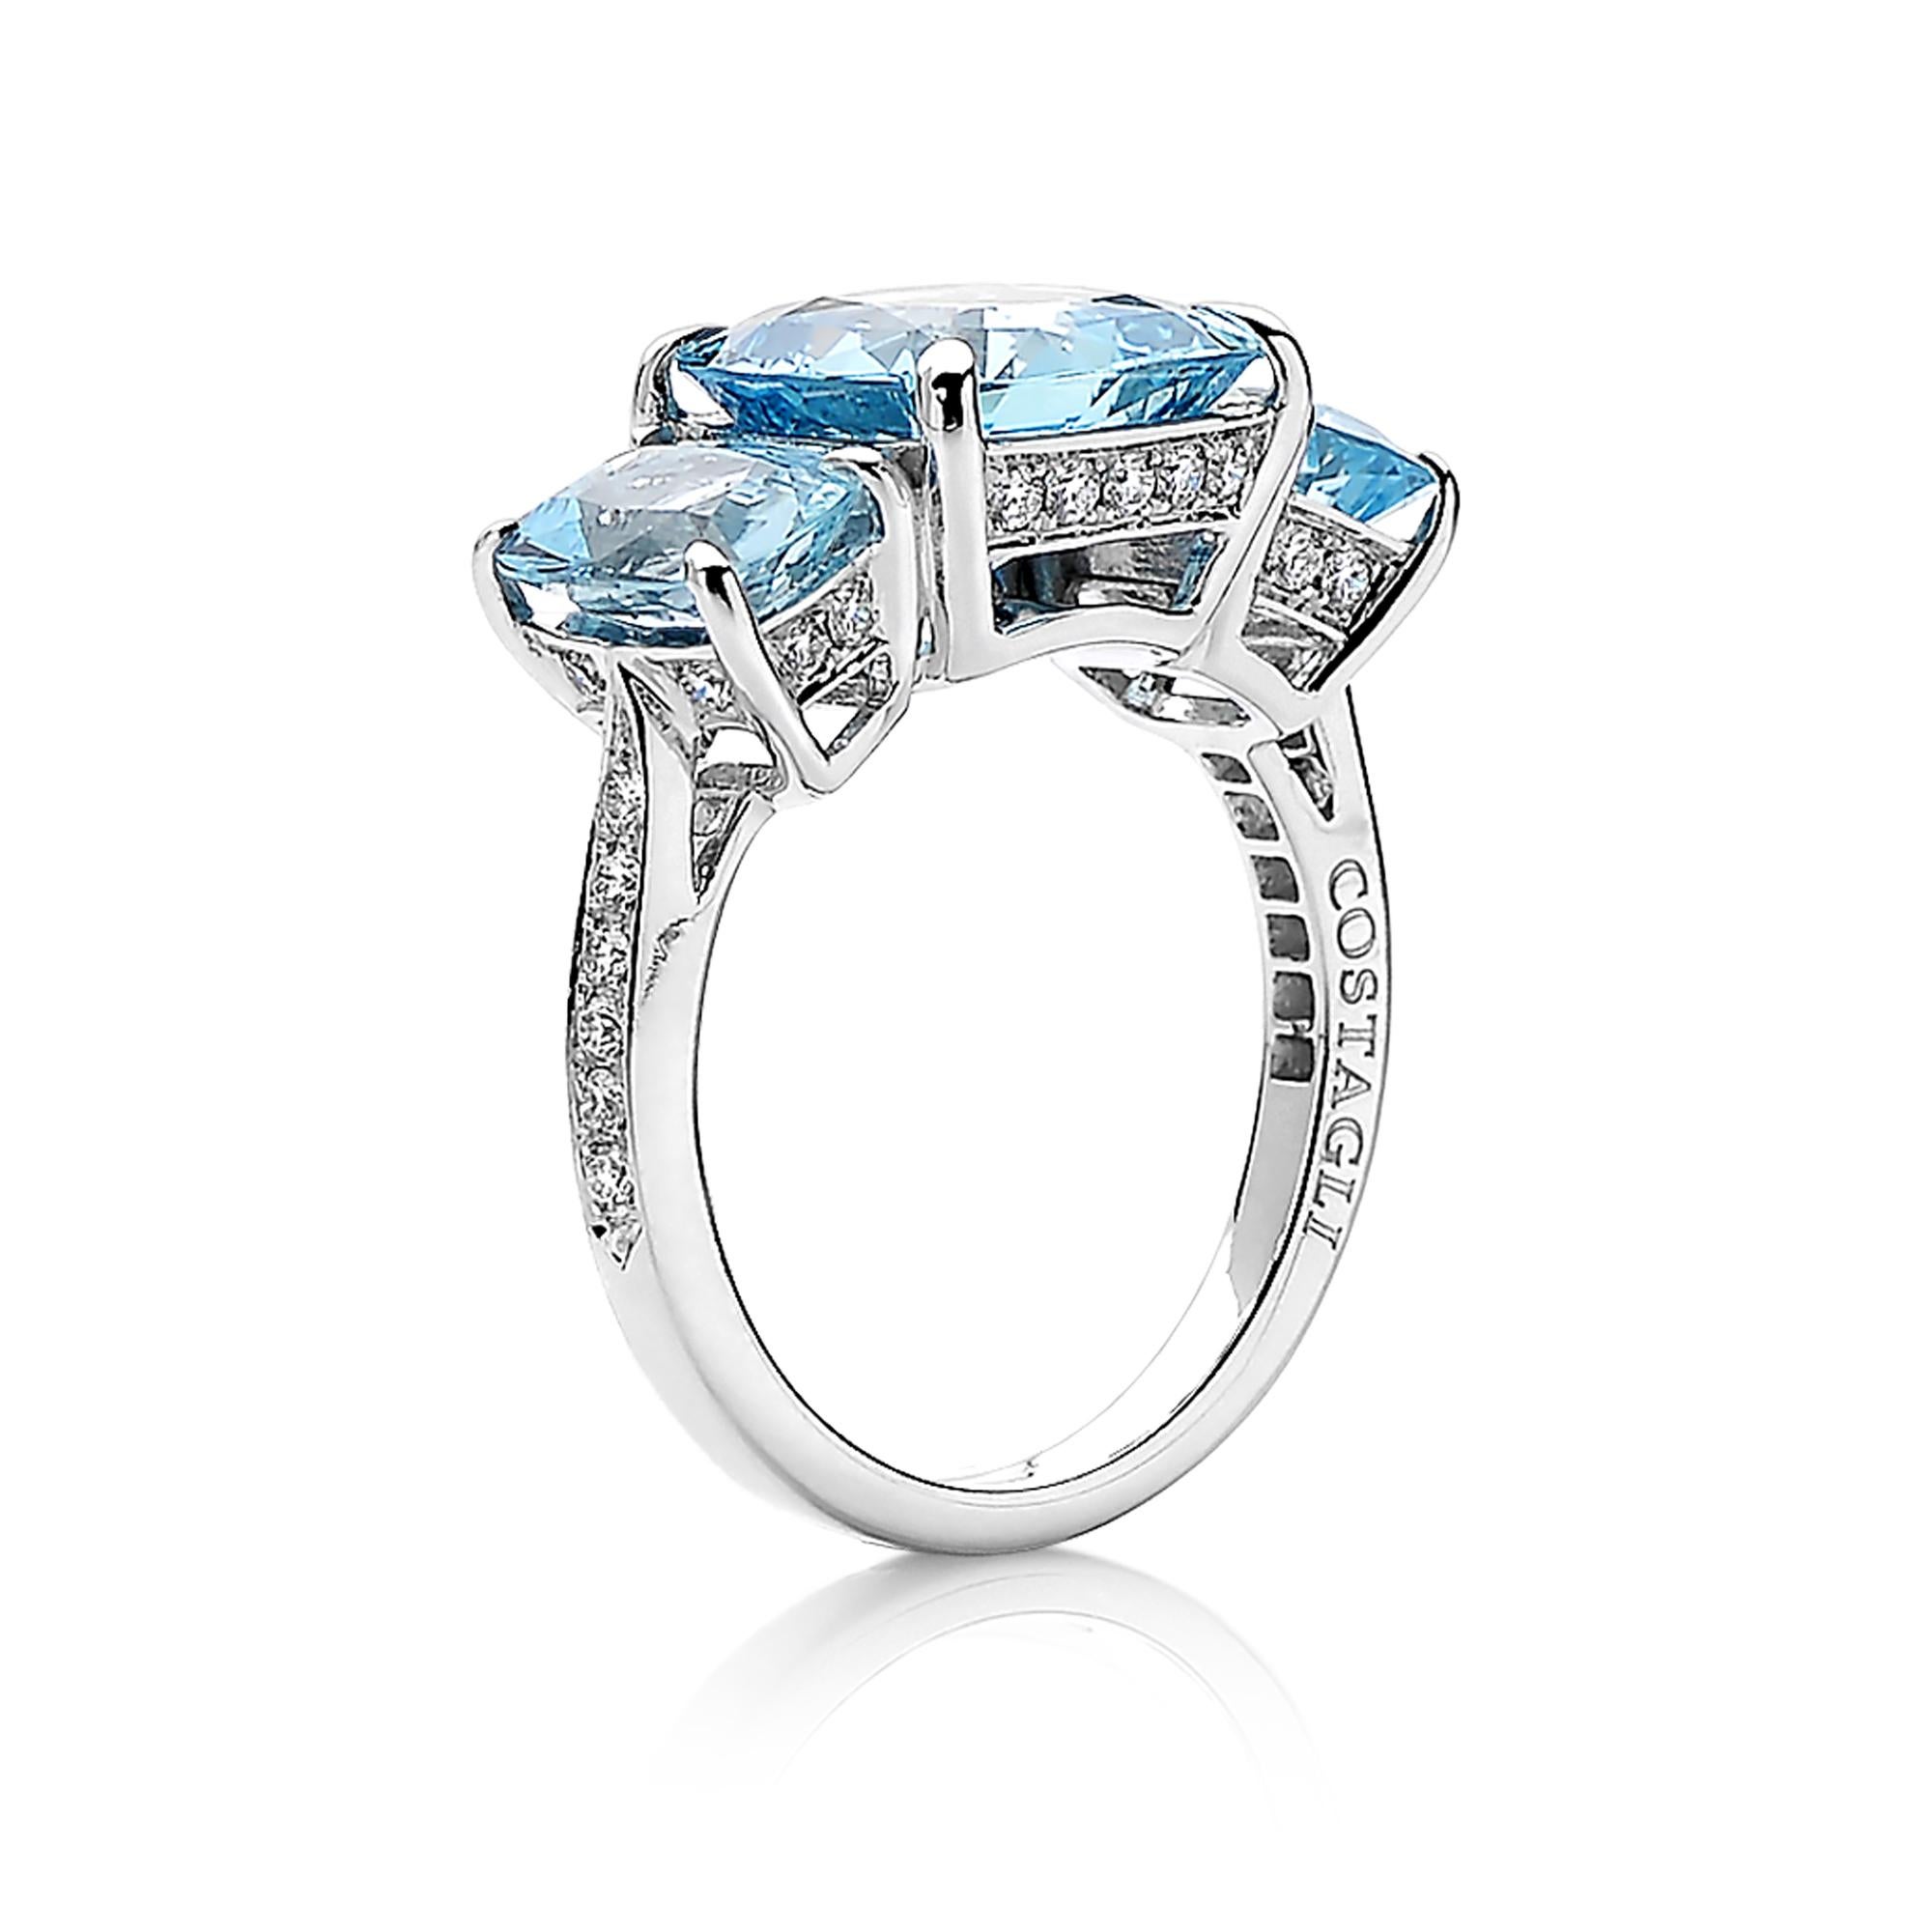 One of a kind cushion-shape aquamarine three stone ring set in 18k white gold with pave-set round, brilliant diamond detailing.

A classic silhouette for ideal cushion cut aquamarines, allowing the ring to feel substantial as the setting covers the